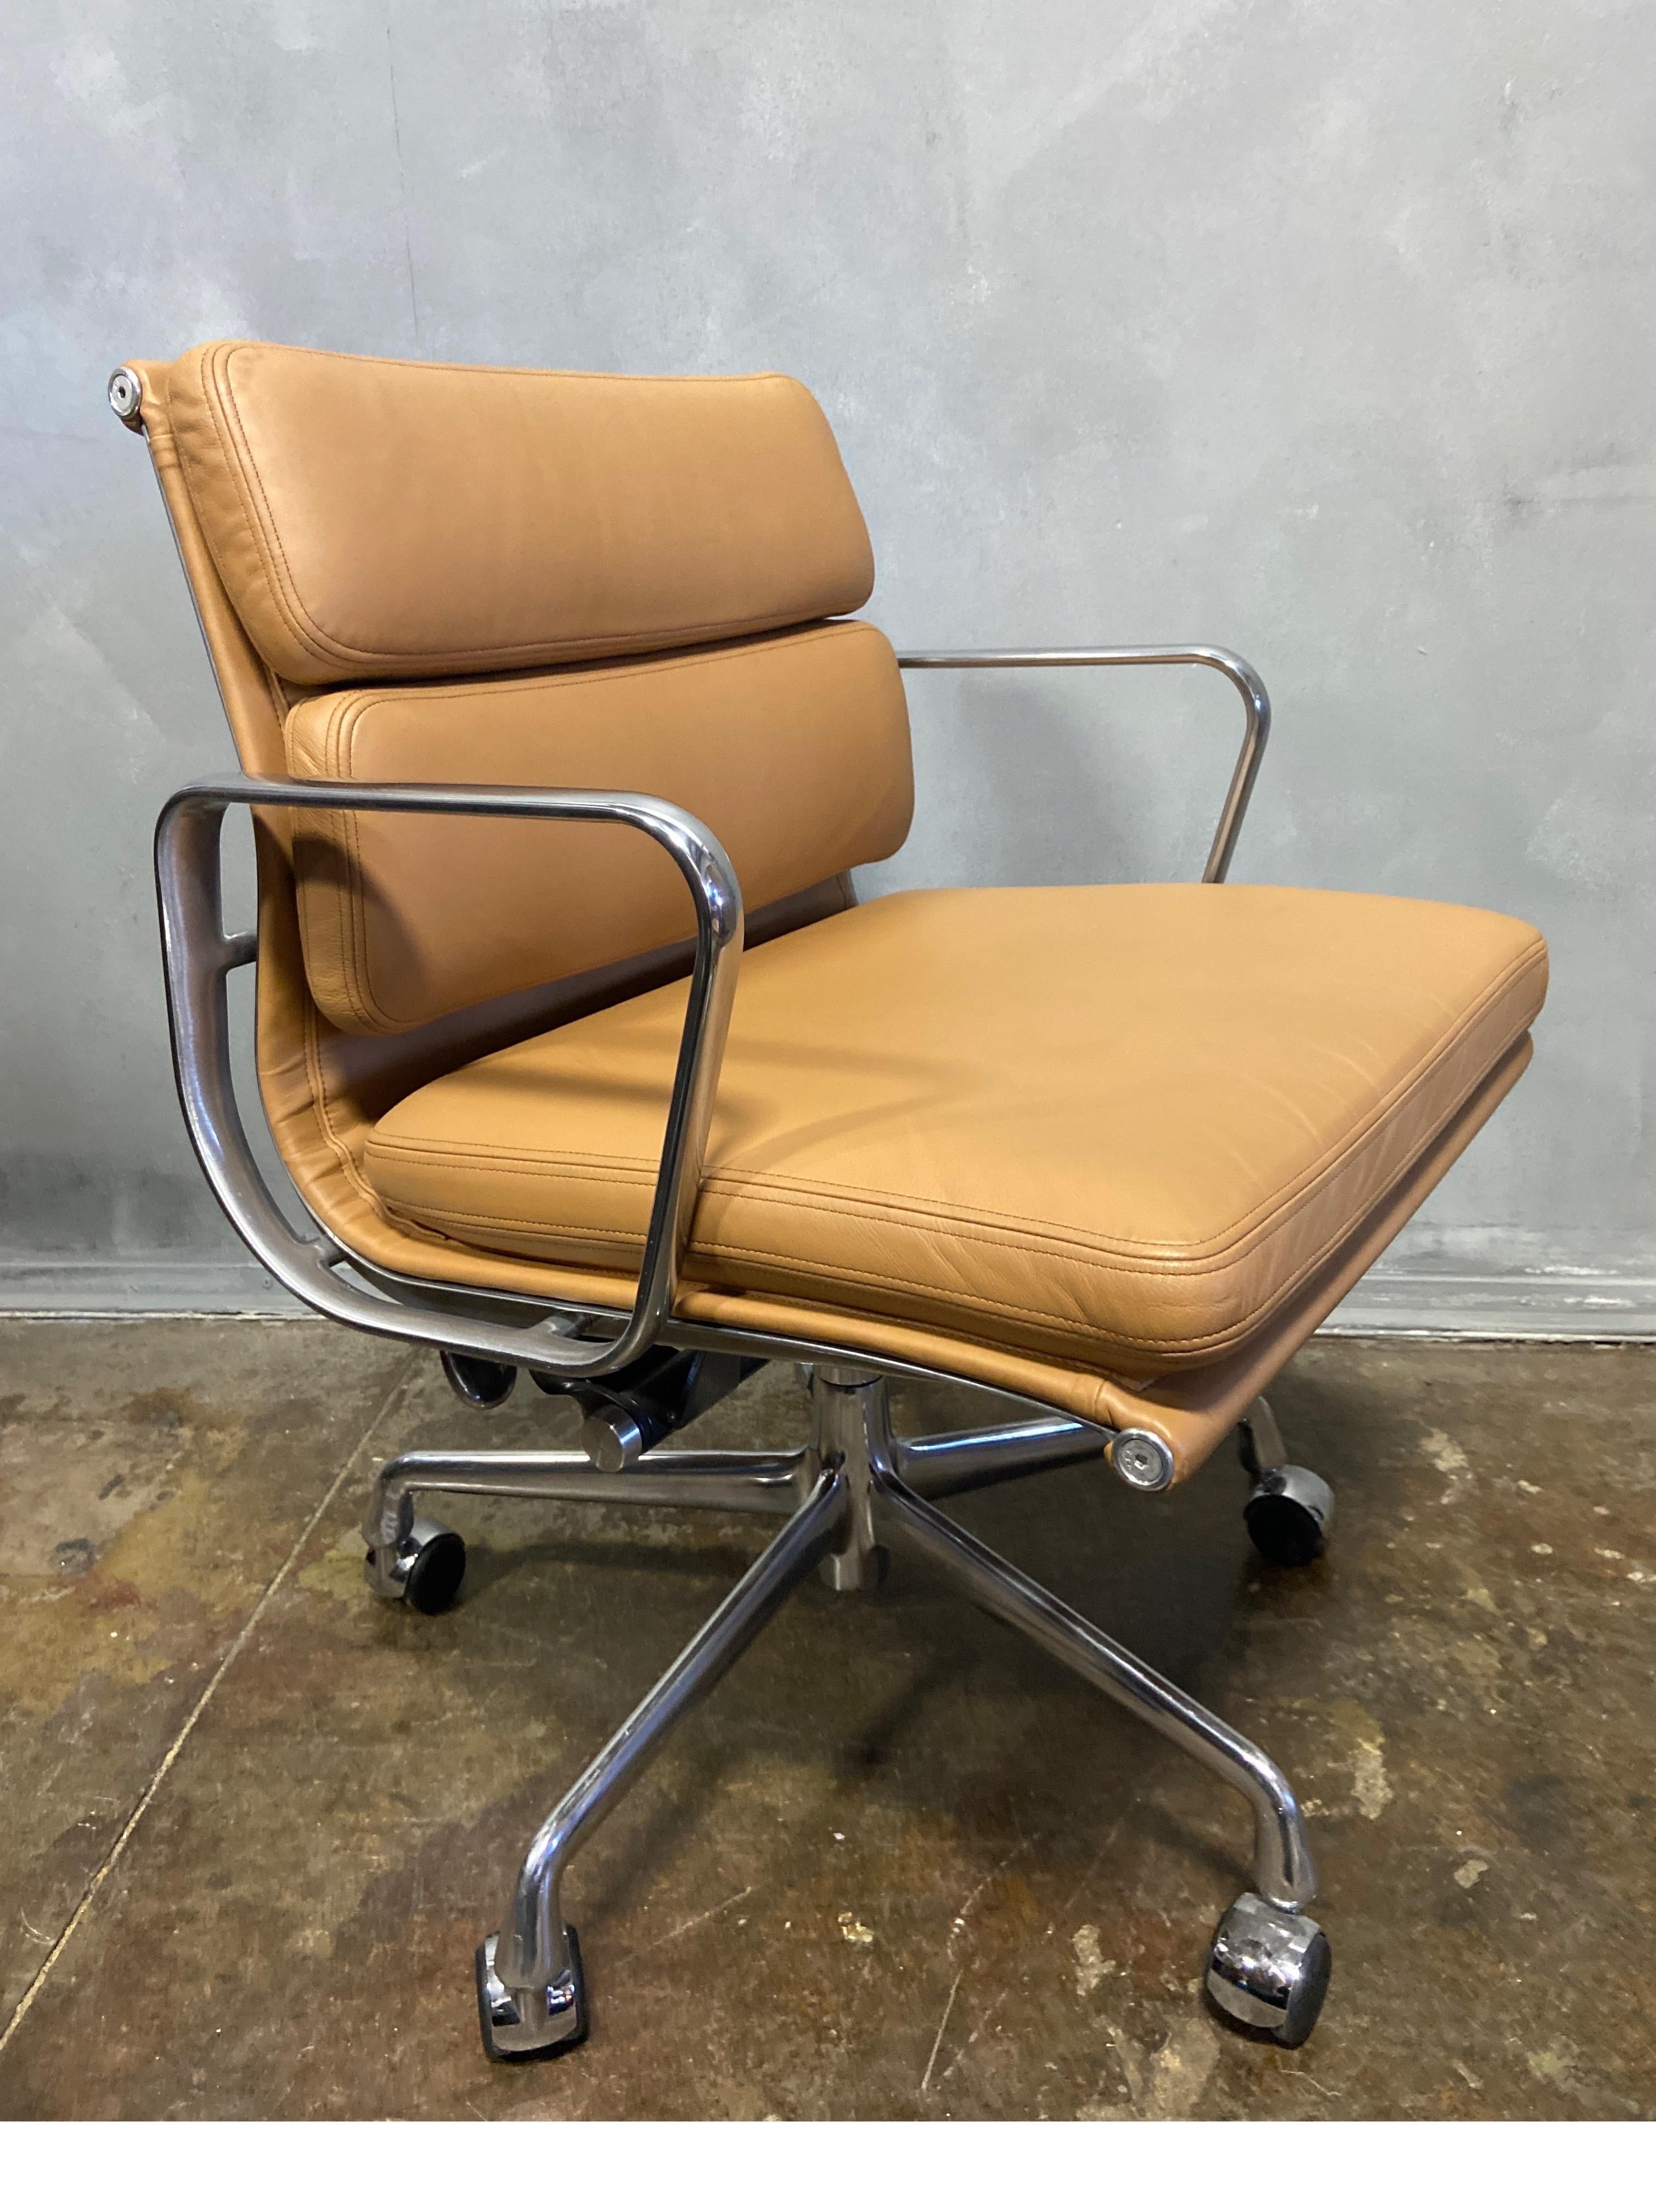 For your consideration are these authentic Eames for Herman Miller soft pad chairs in saddle brown leather. Adjustable tilt and height adjustment. These examples are icons of Mid-Century Modern design and in exceptionally good vintage condition.